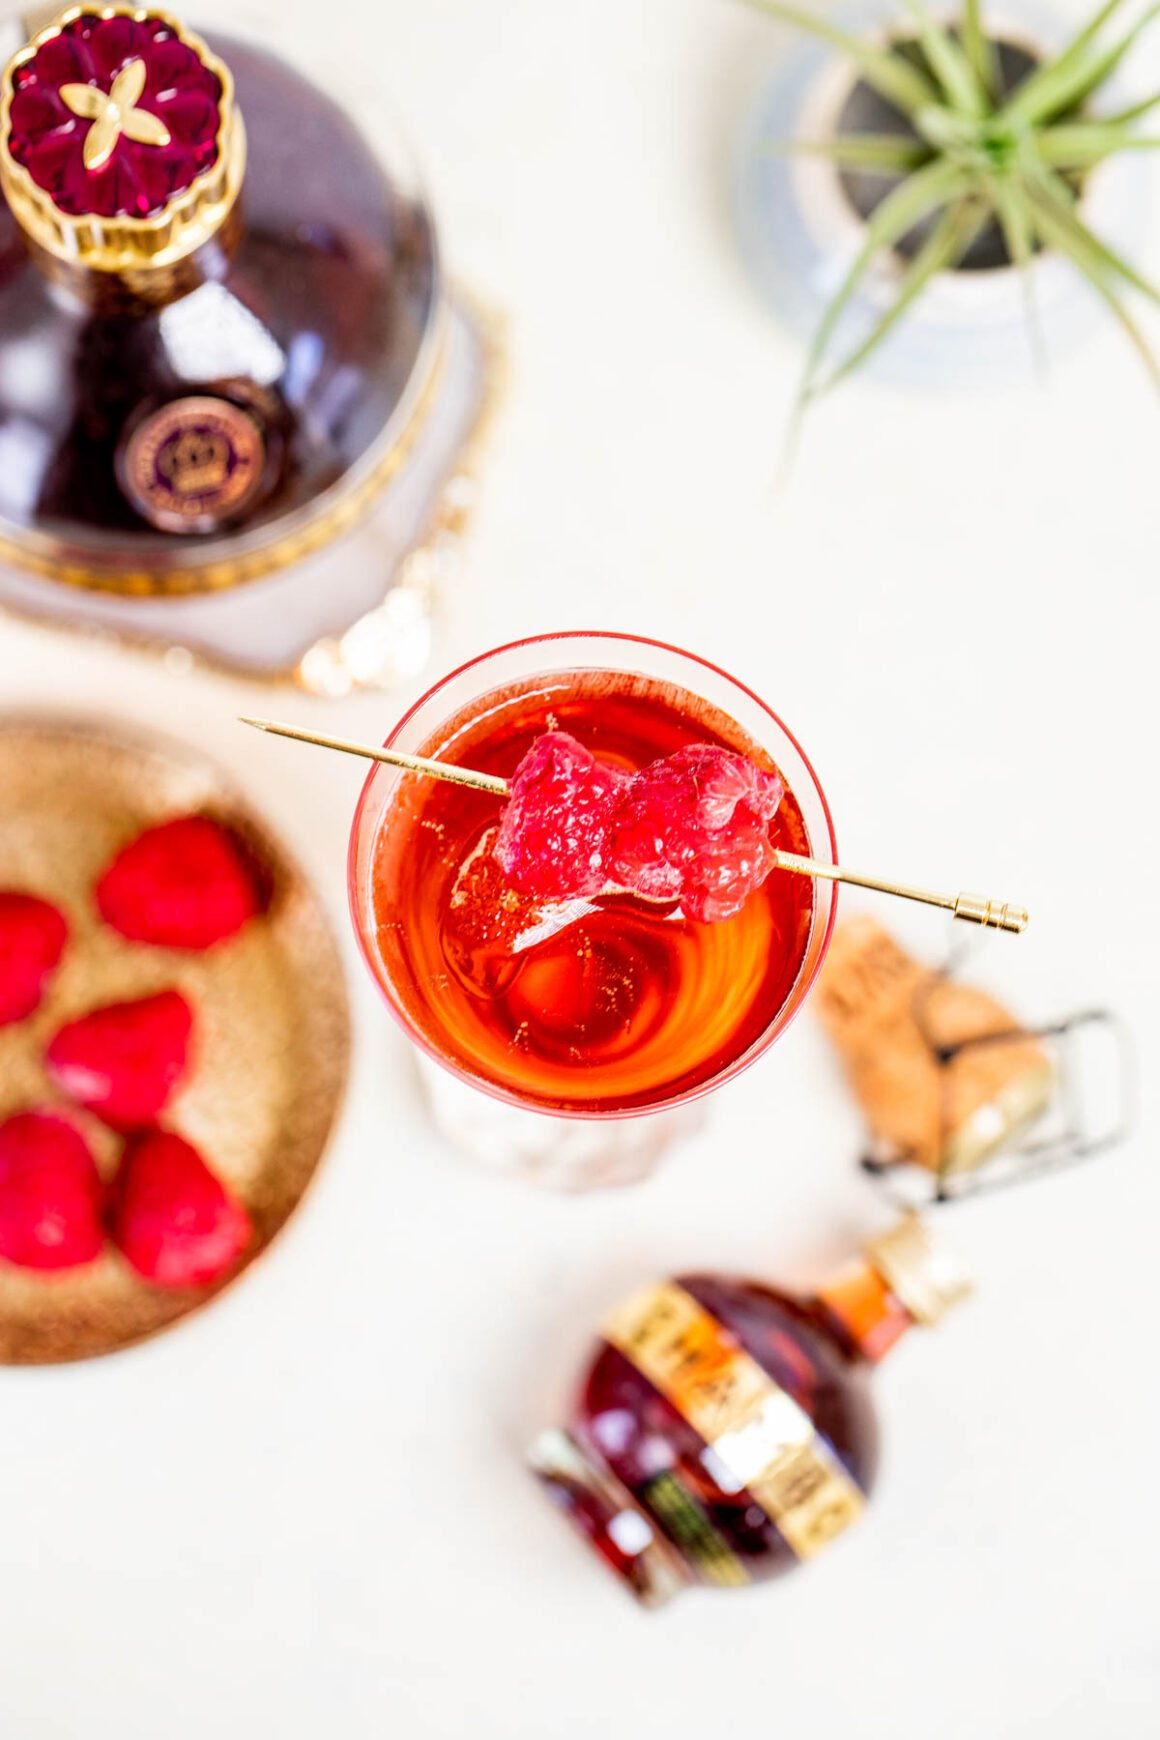 The Kir Royal delivers an experience that is both refreshing and indulgent. 